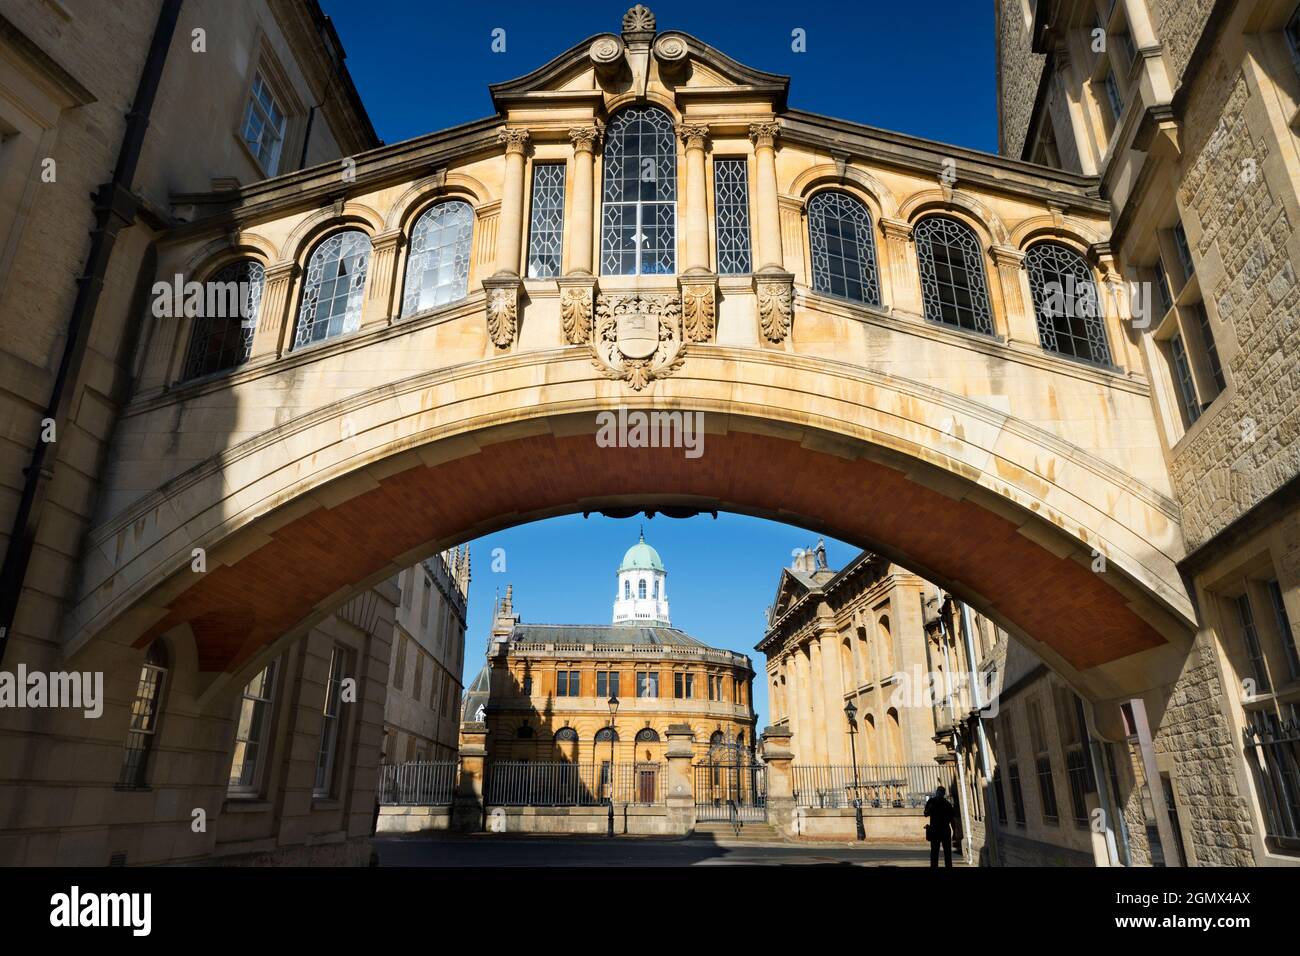 Oxford, England - 7 August 2020; No people in view - pandemic!  Linking two parts of Hertford College, Oxford, its landmark Hertford Bridge - often du Stock Photo